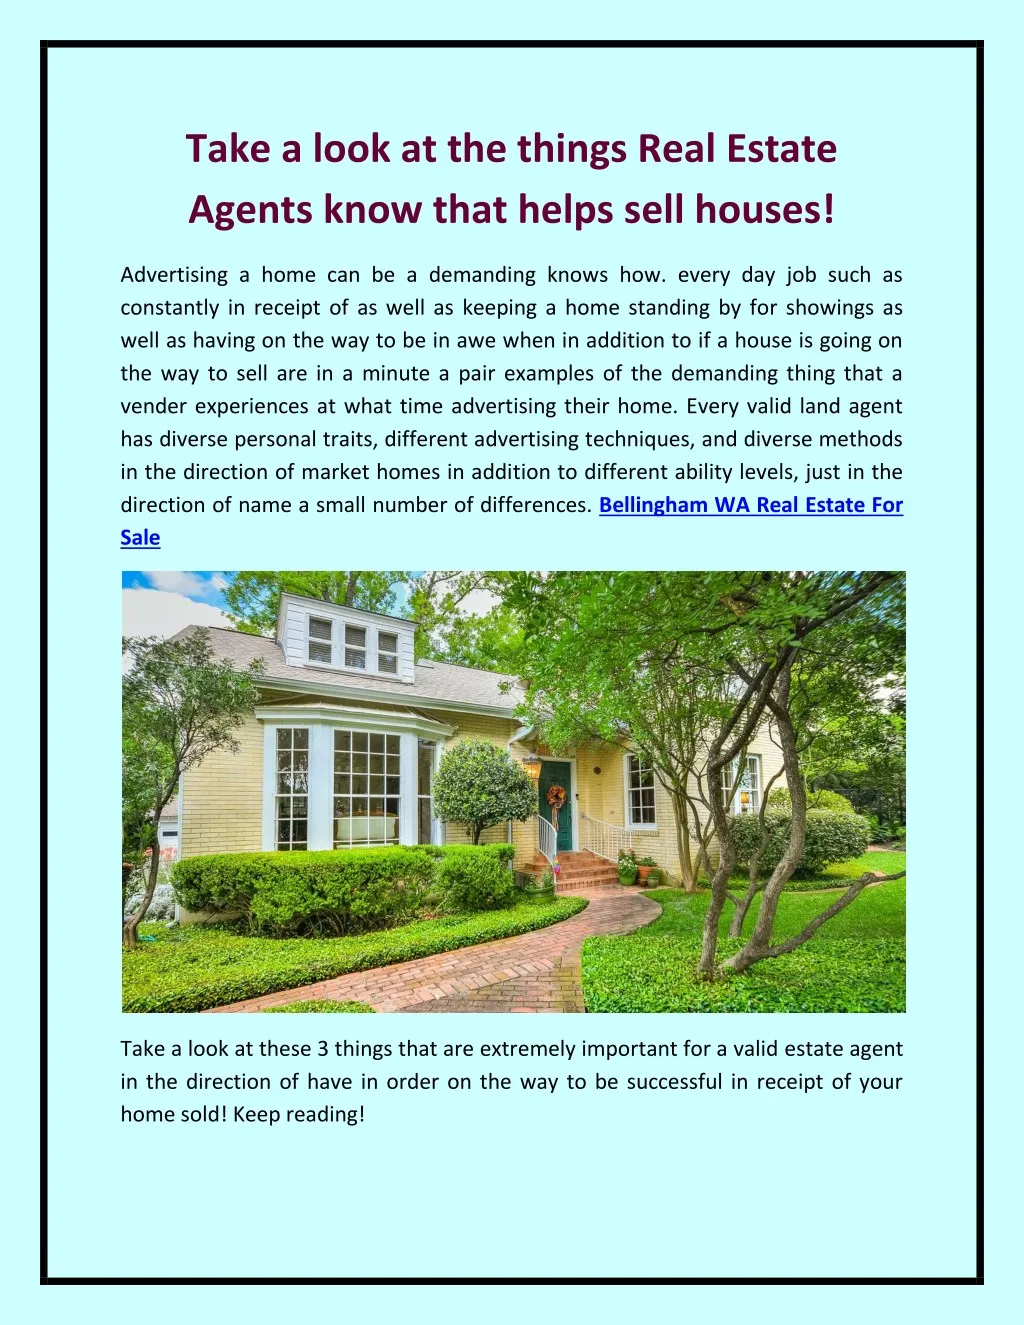 take a look at the things real estate agents know